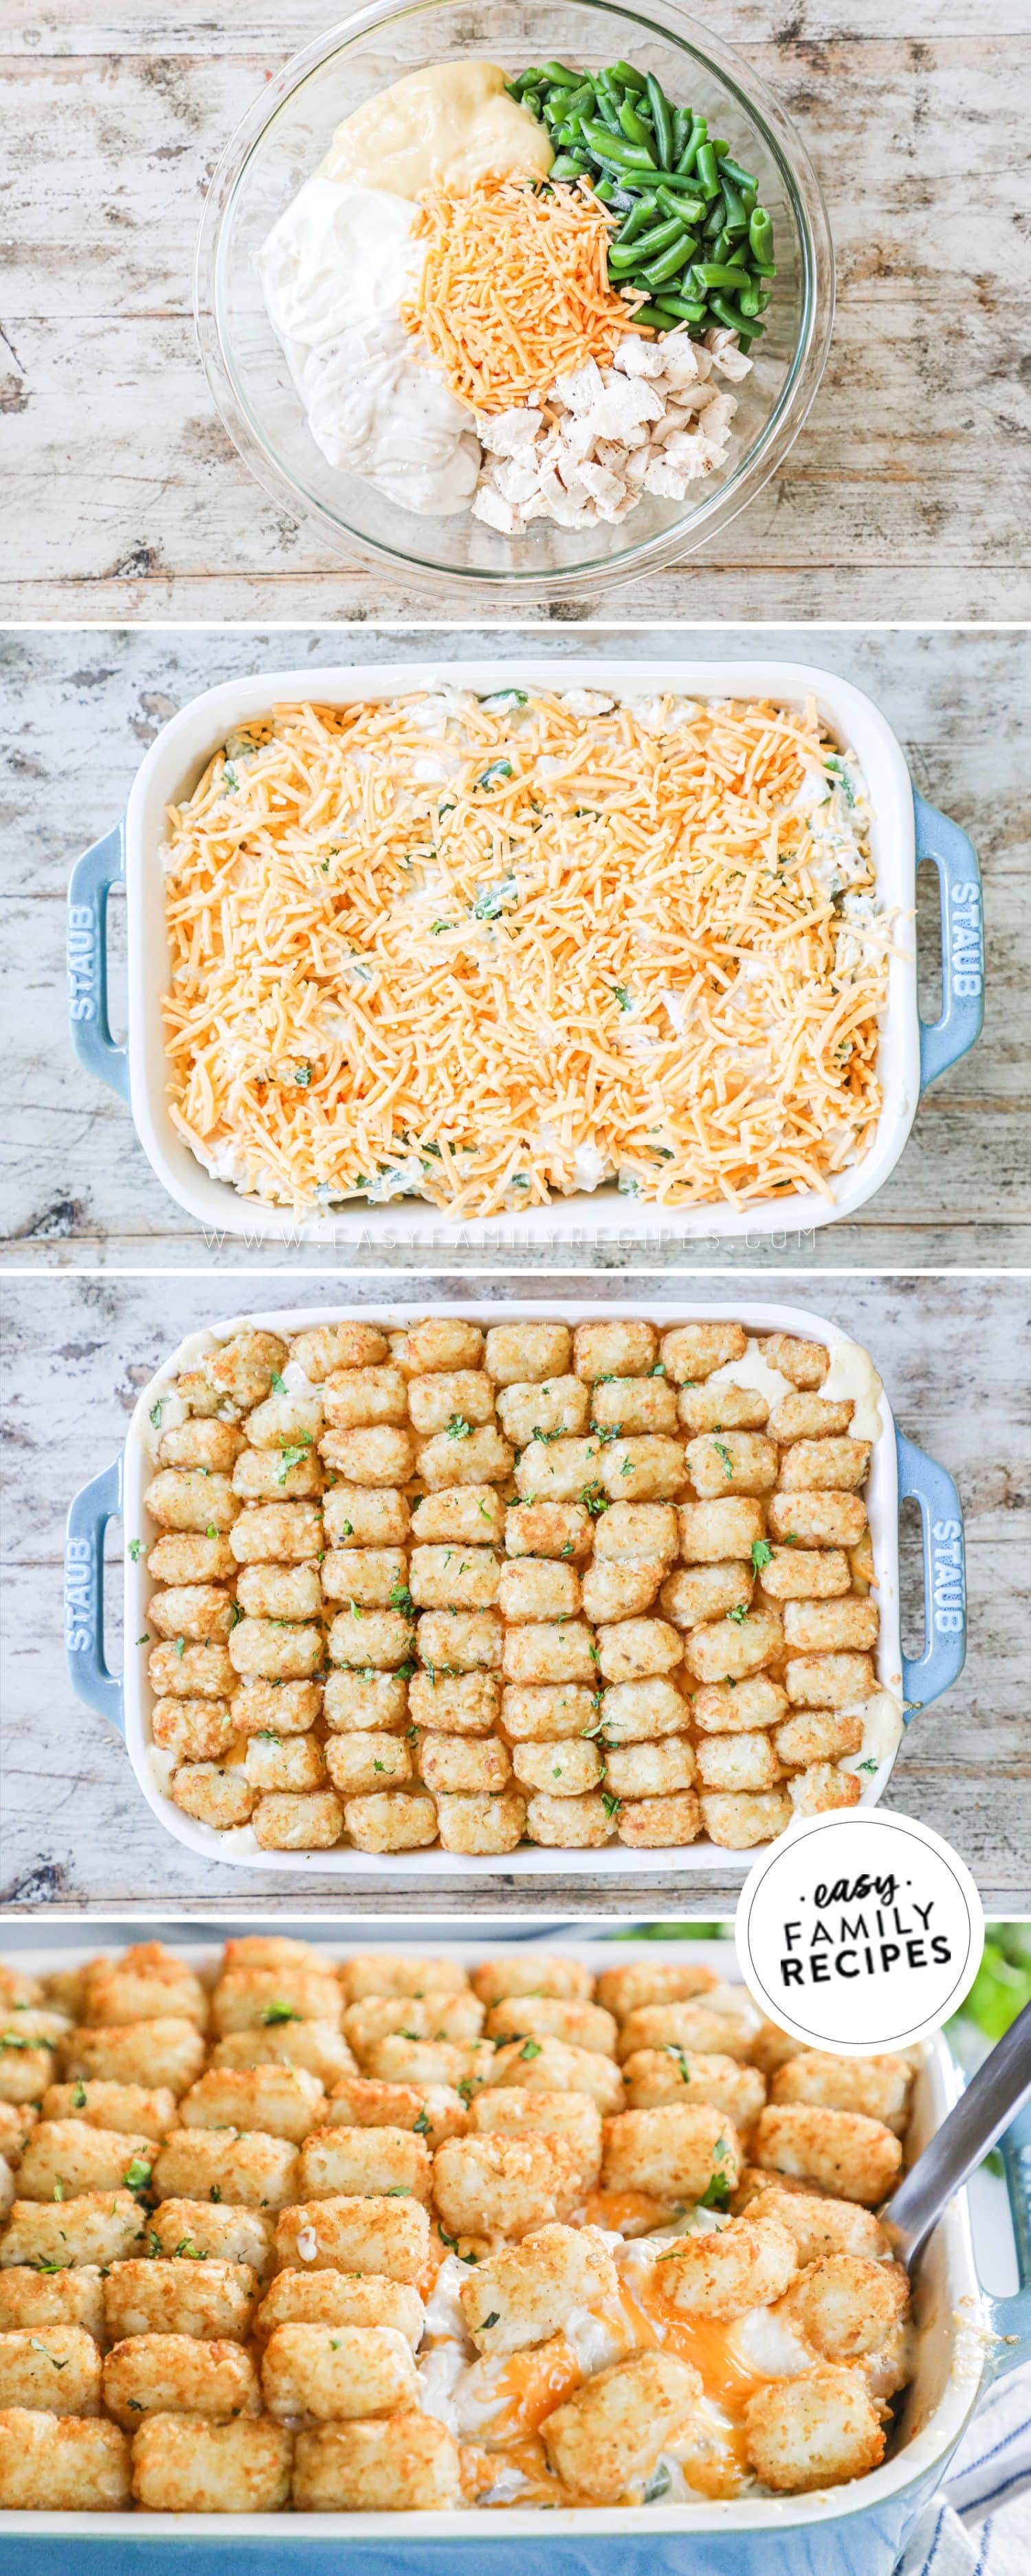 4 image collage making tater tot casserole: 1)make the filling, 2)layer the casserole, 3)top with tater tots, 4)bake and serve!